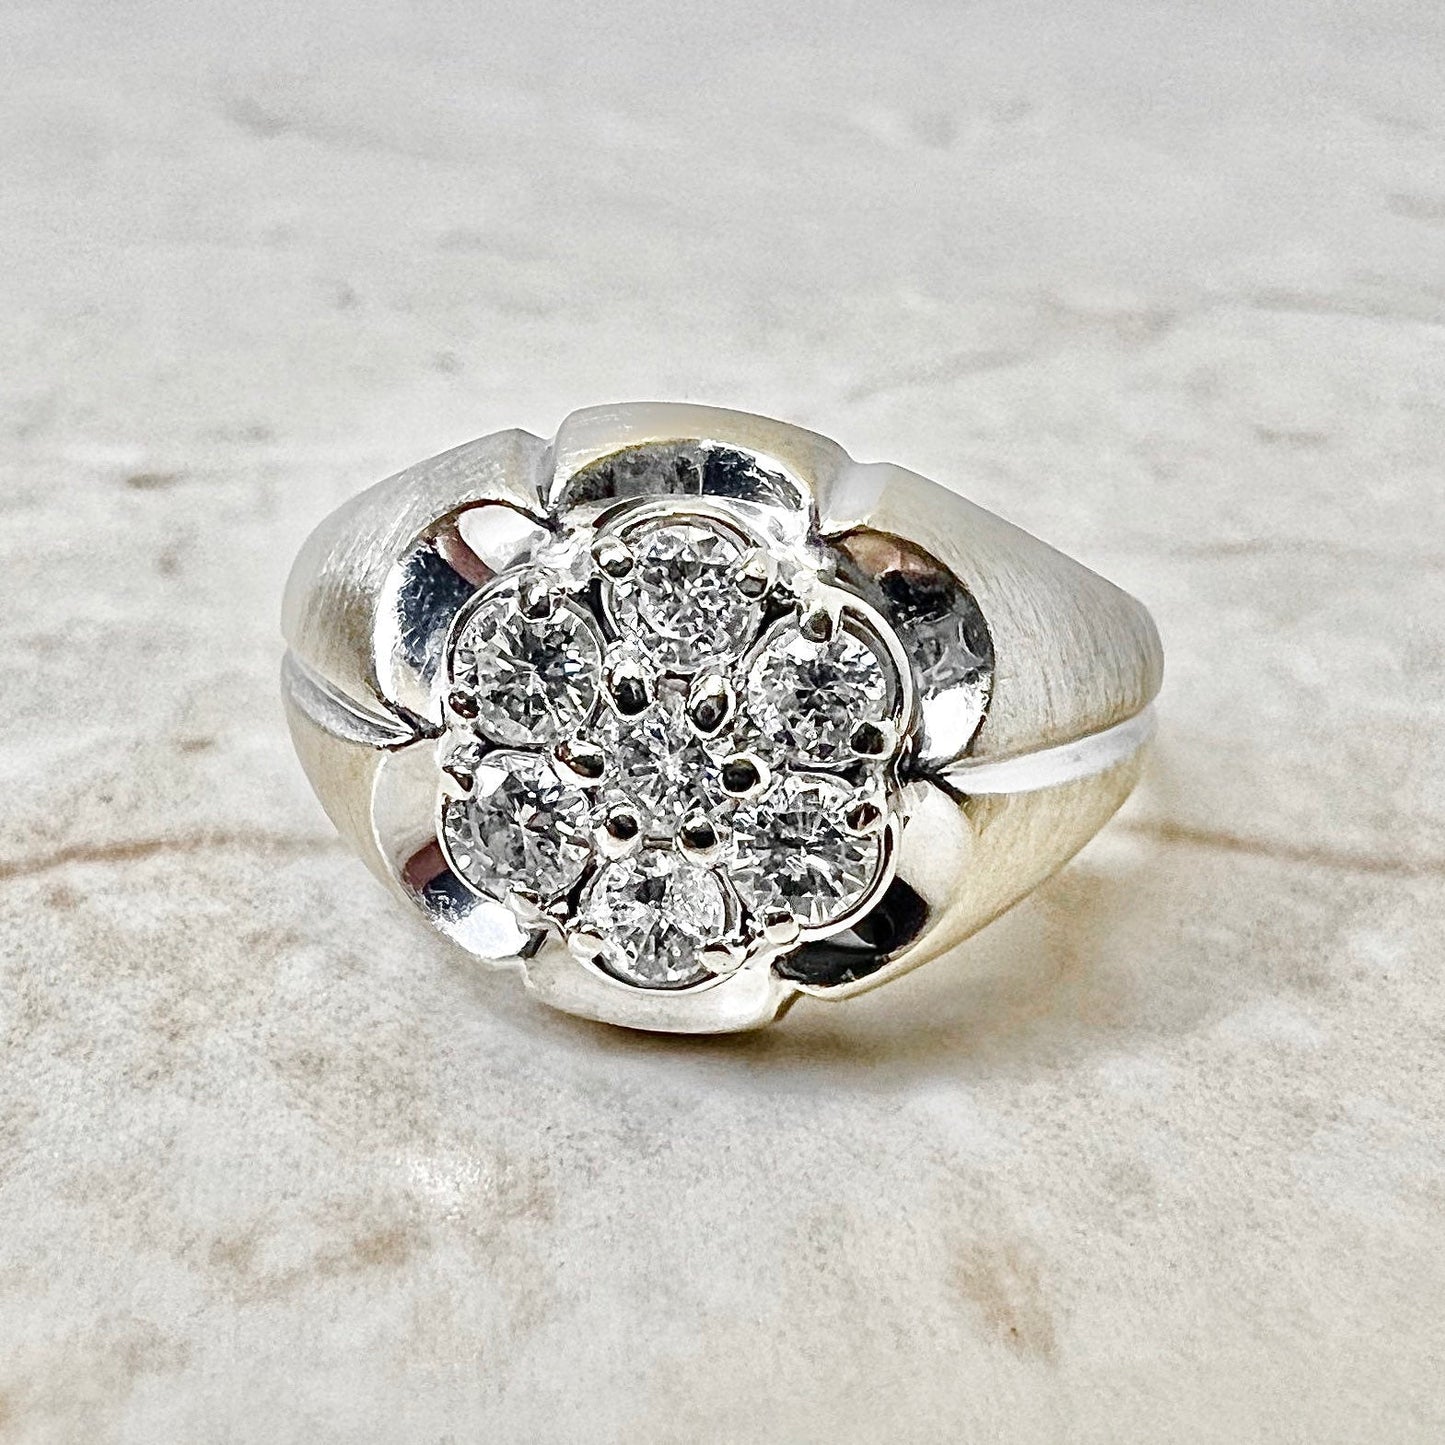 Vintage 14K Diamond Cluster Ring - Yellow & White Gold Cocktail Ring - Promise Ring - Anniversary Ring - Engagement Ring - Birthday Gift